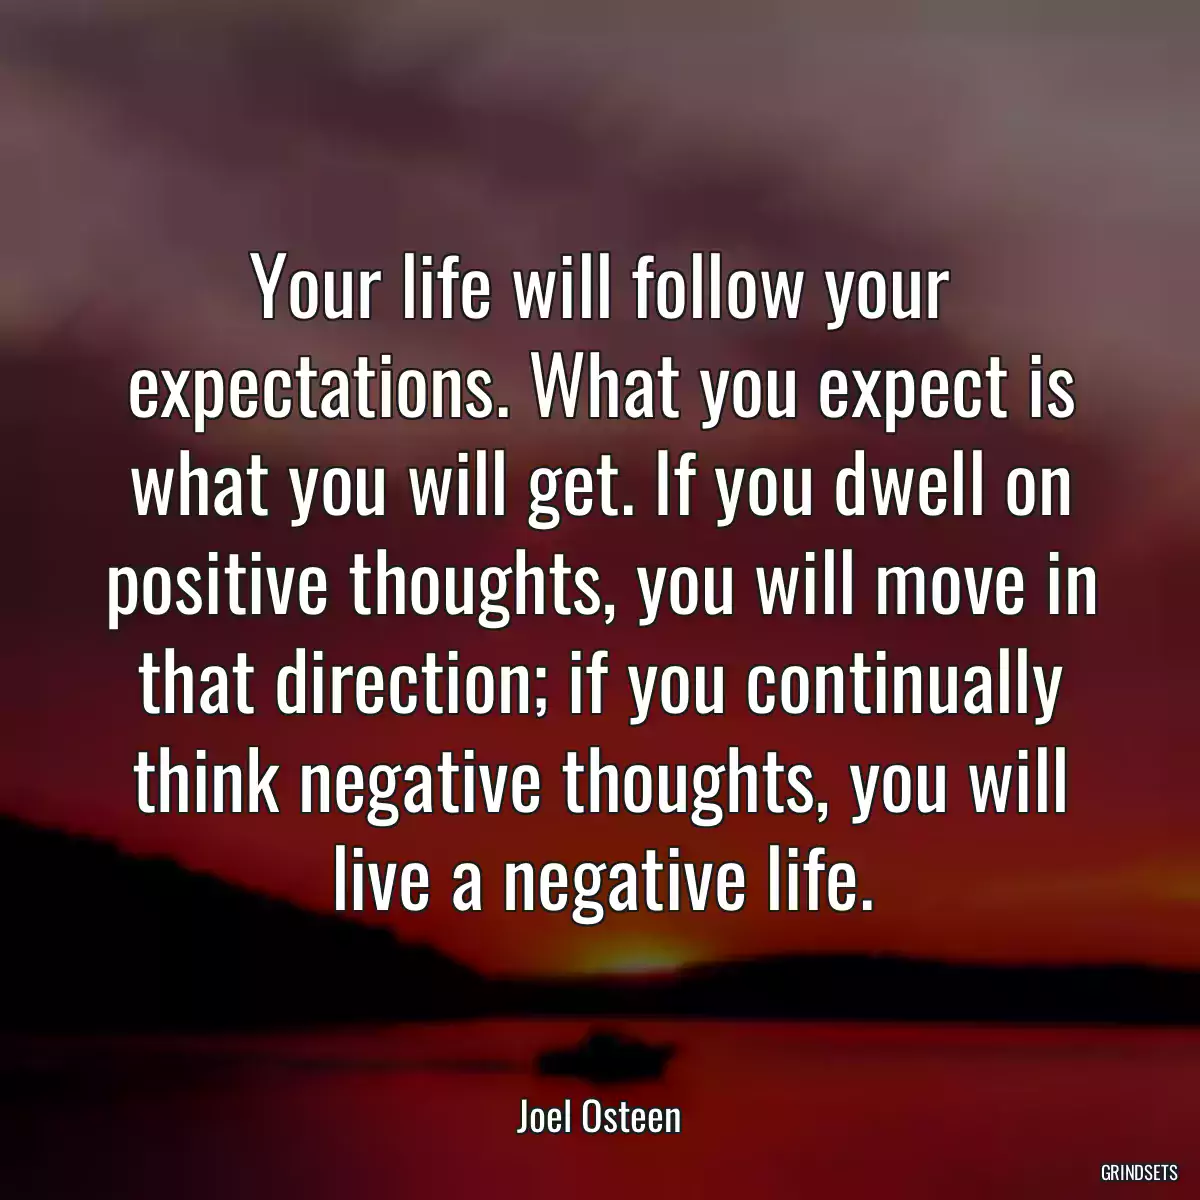 Your life will follow your expectations. What you expect is what you will get. If you dwell on positive thoughts, you will move in that direction; if you continually think negative thoughts, you will live a negative life.